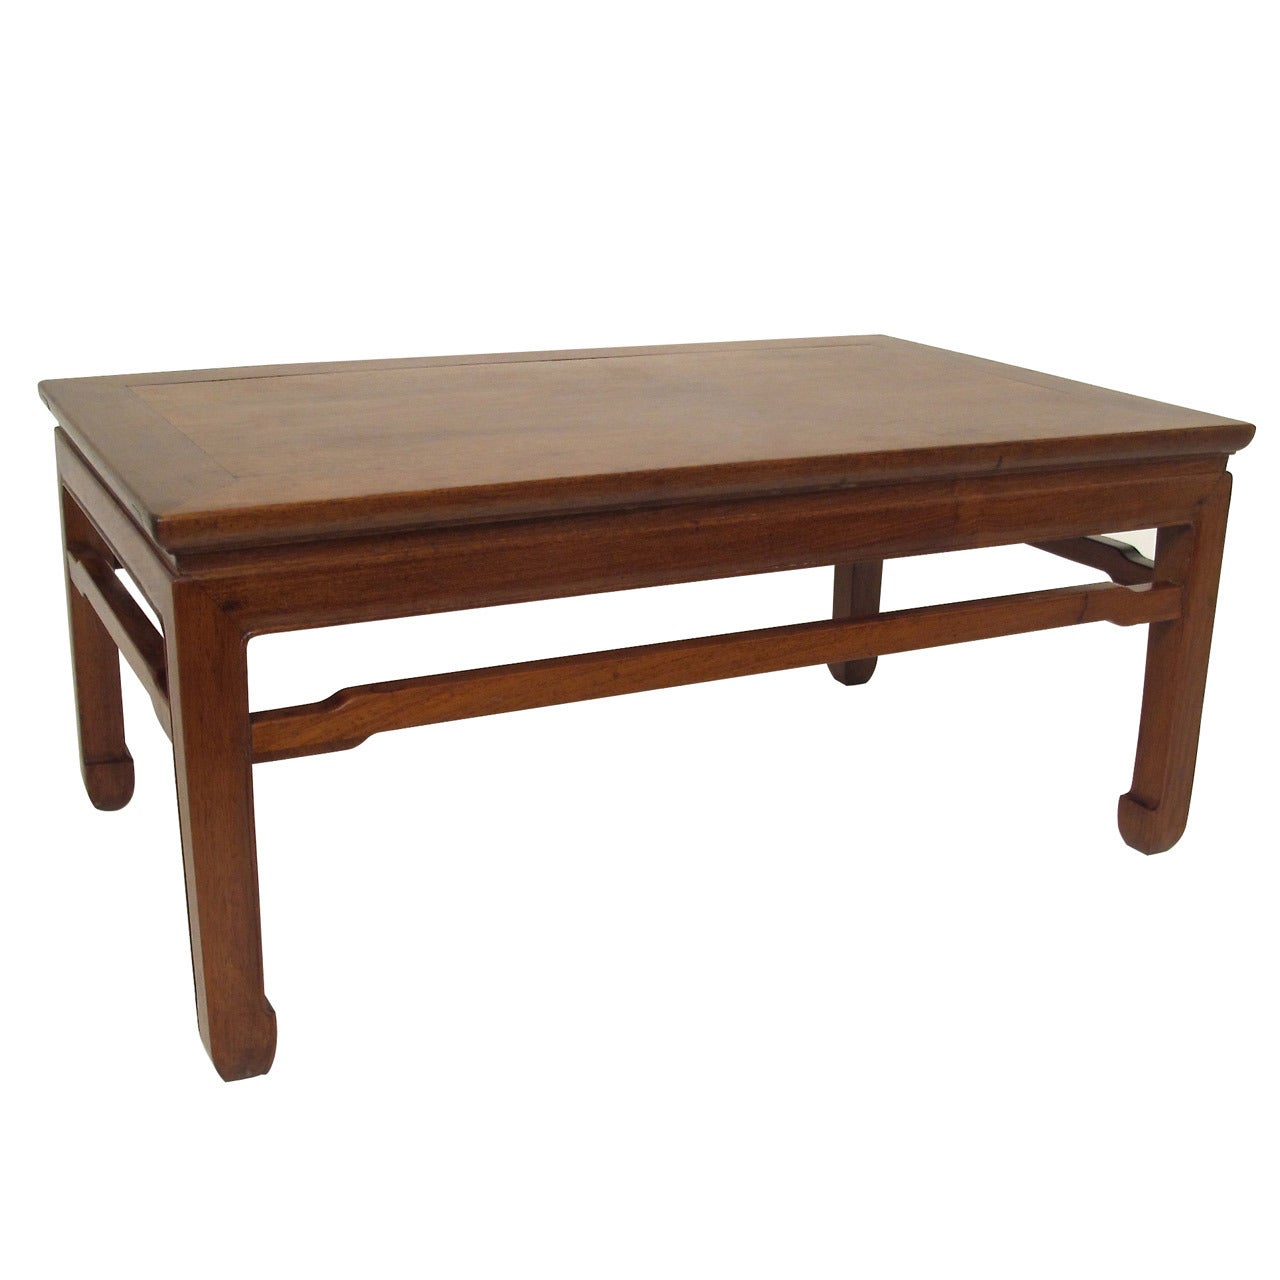 Chinese Low Table or Coffee Table